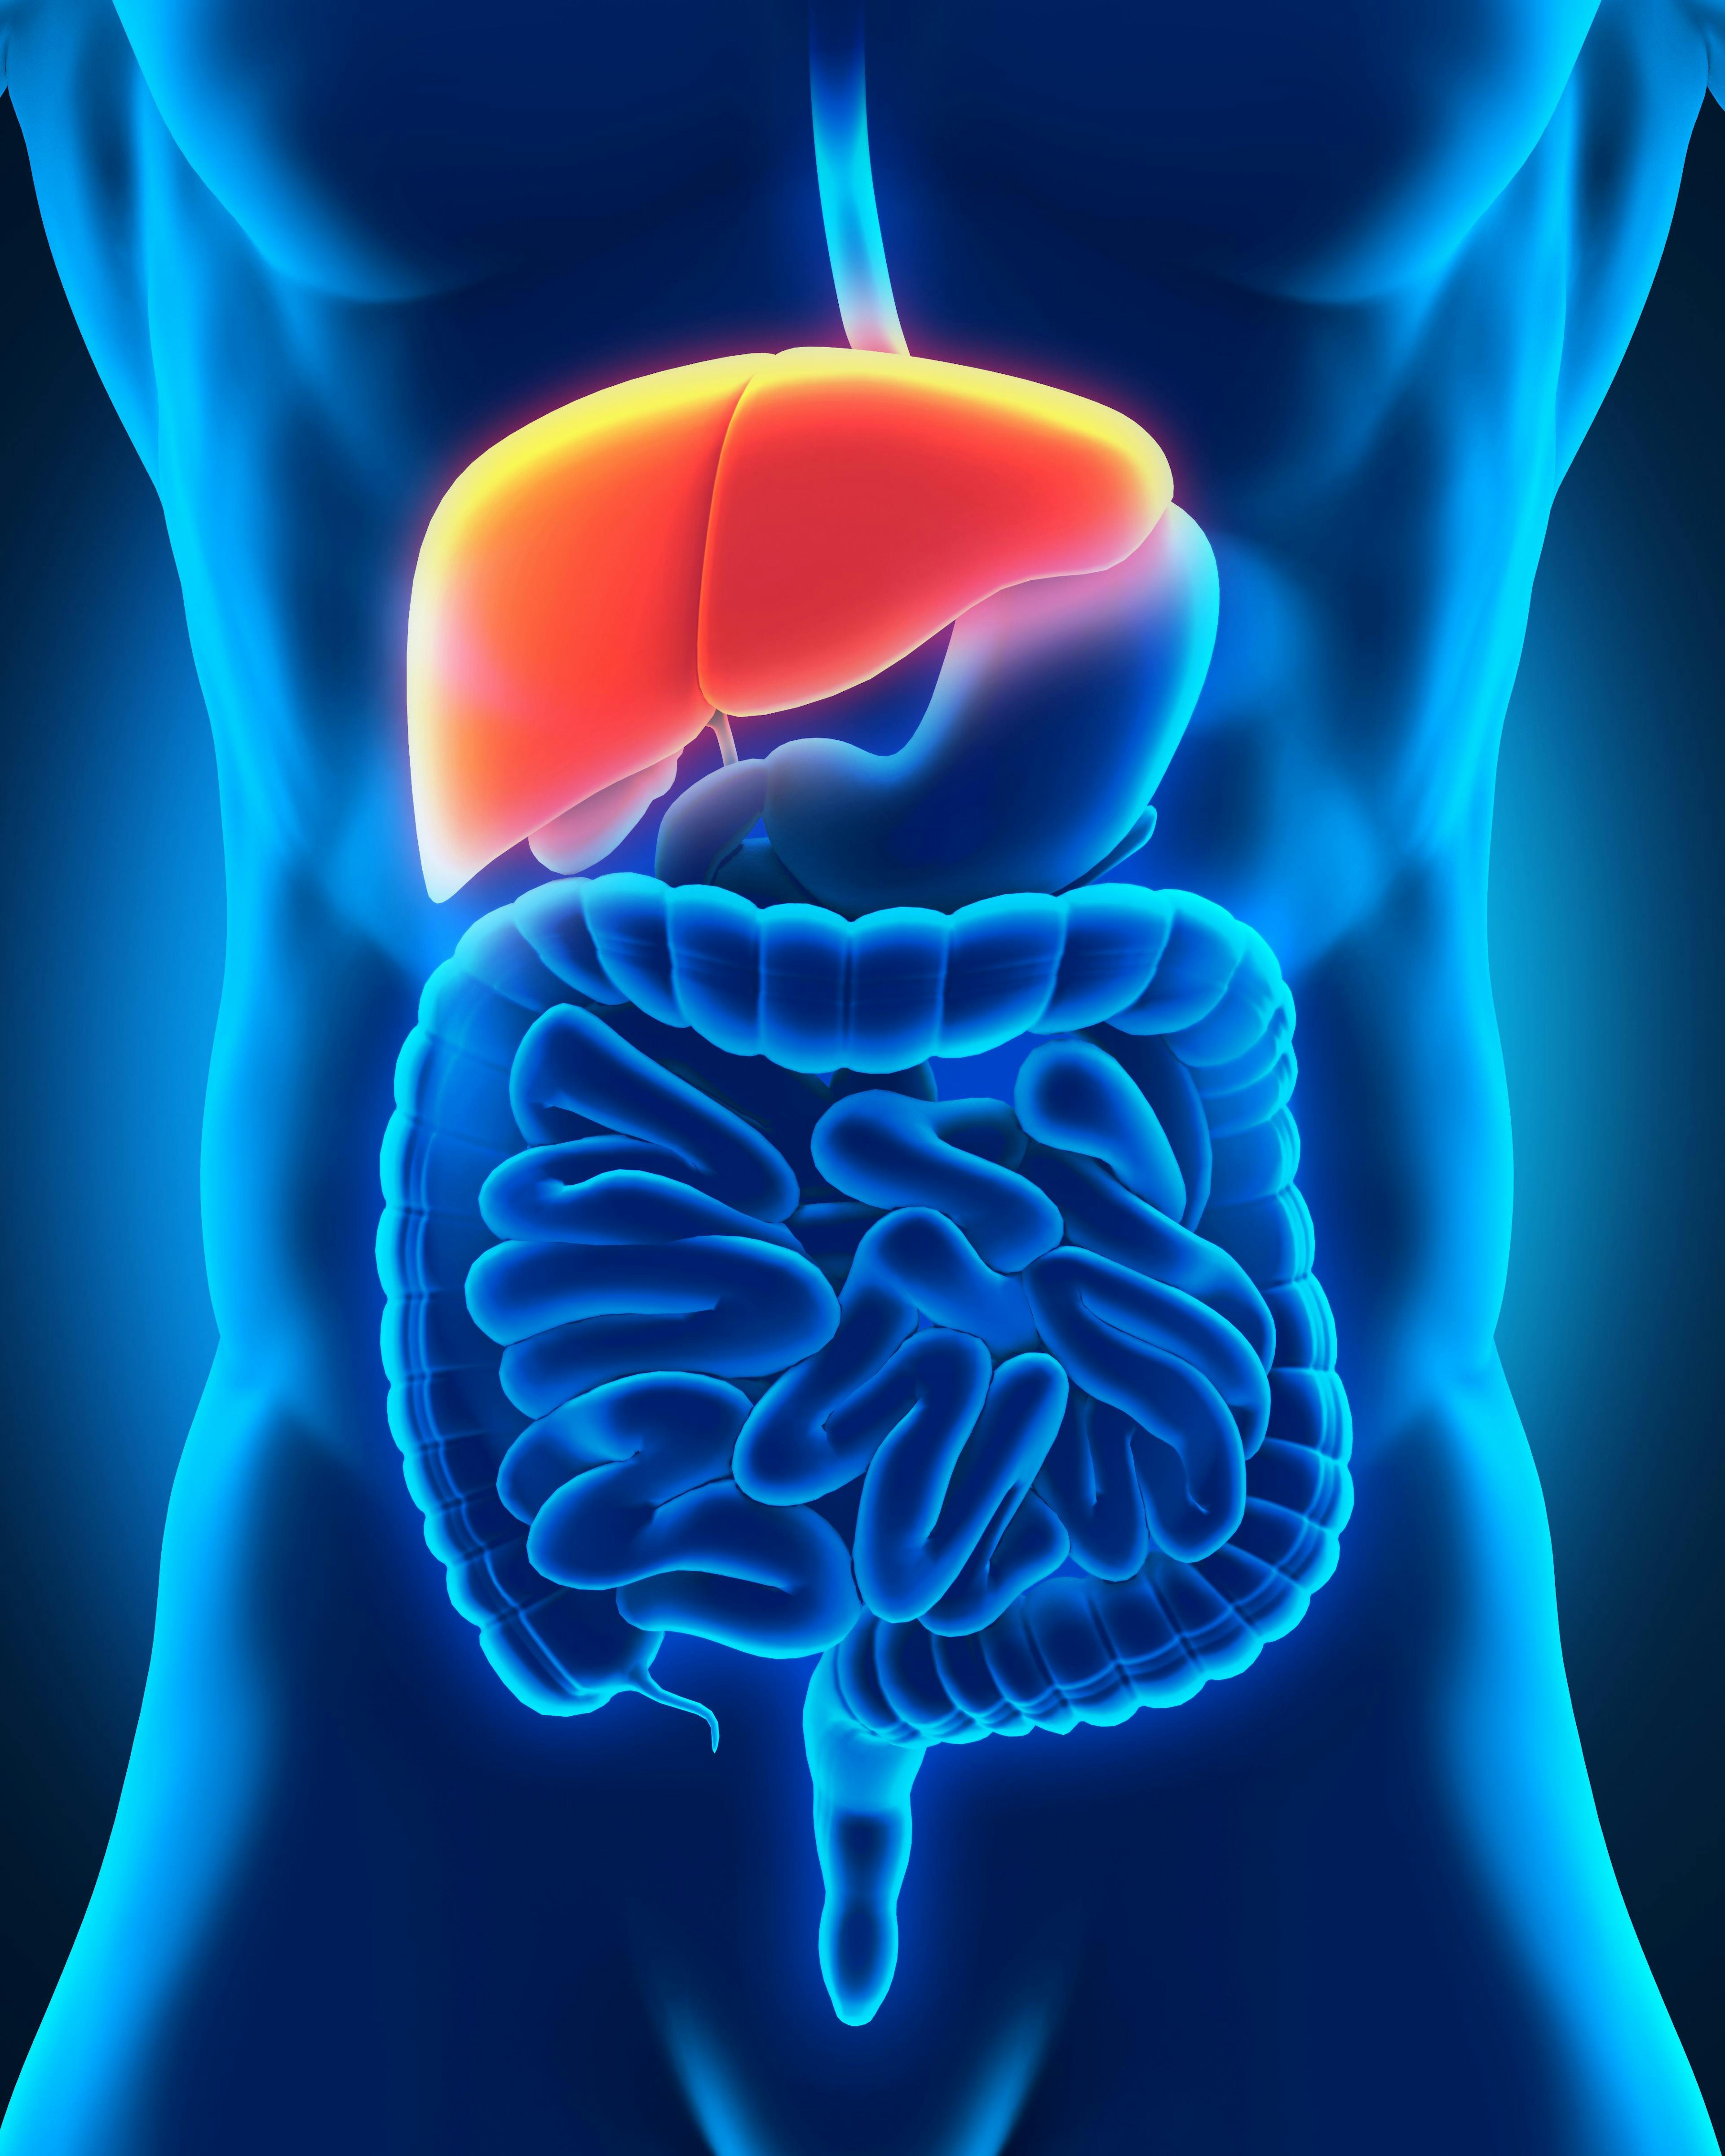 Cabometyx-Tecentriq Combo Fails to Improve Survival in Patients With Liver Cancer